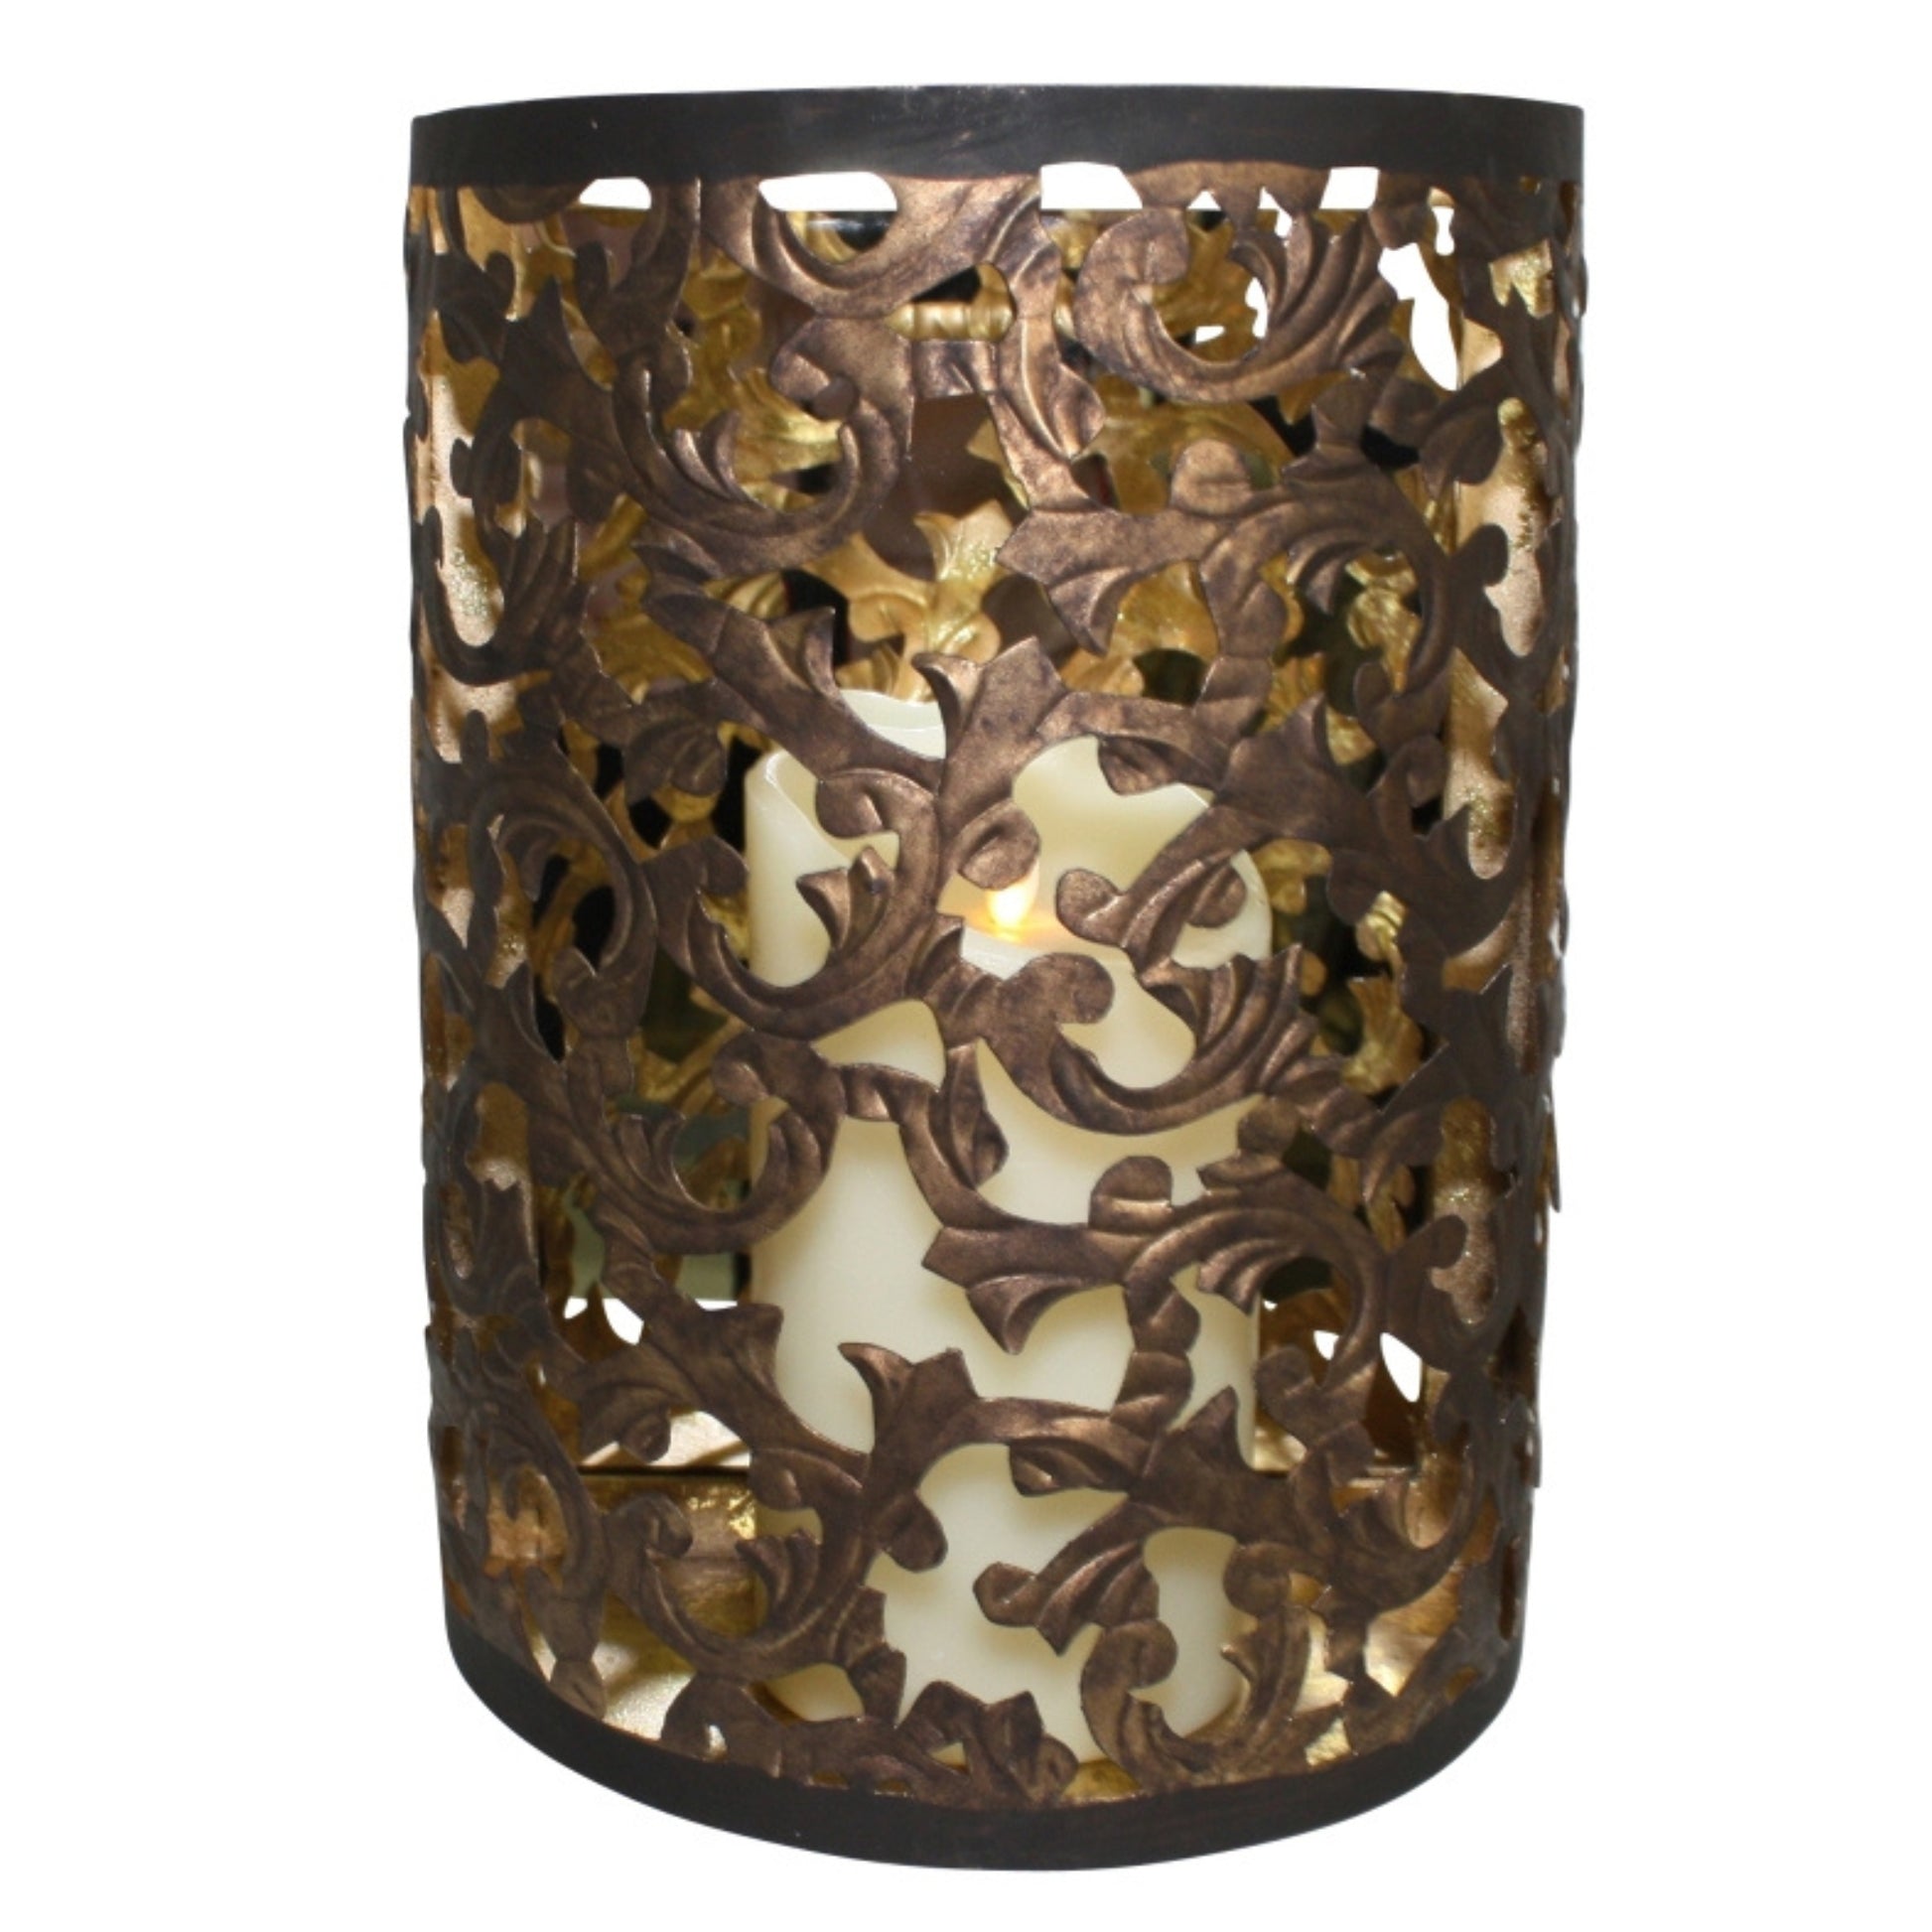 Dark Gold Acanthus Leaf Design Iron Sconce - Tole & Iron Cut-Out Demilune Candle Wall Sconce with Mirrored Back | INSIDE OUT | InsideOutCatalog.com